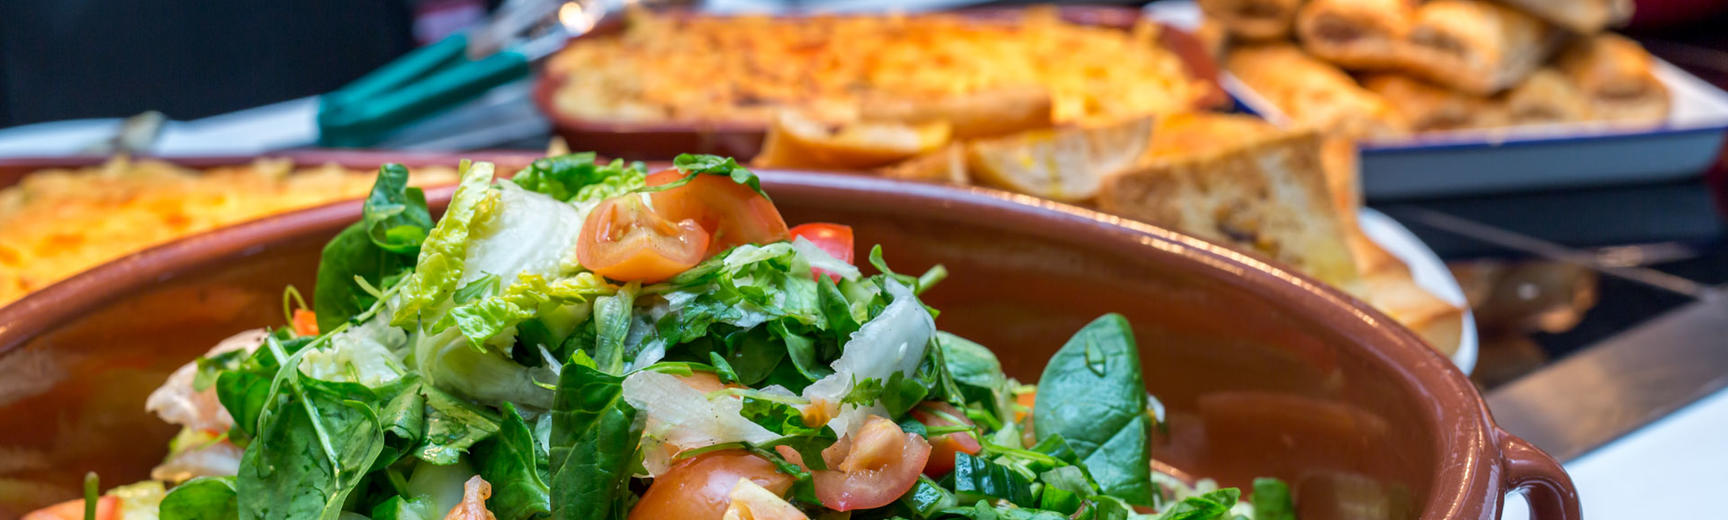 Close-up photo of a bowl of green salad with various hot food in background